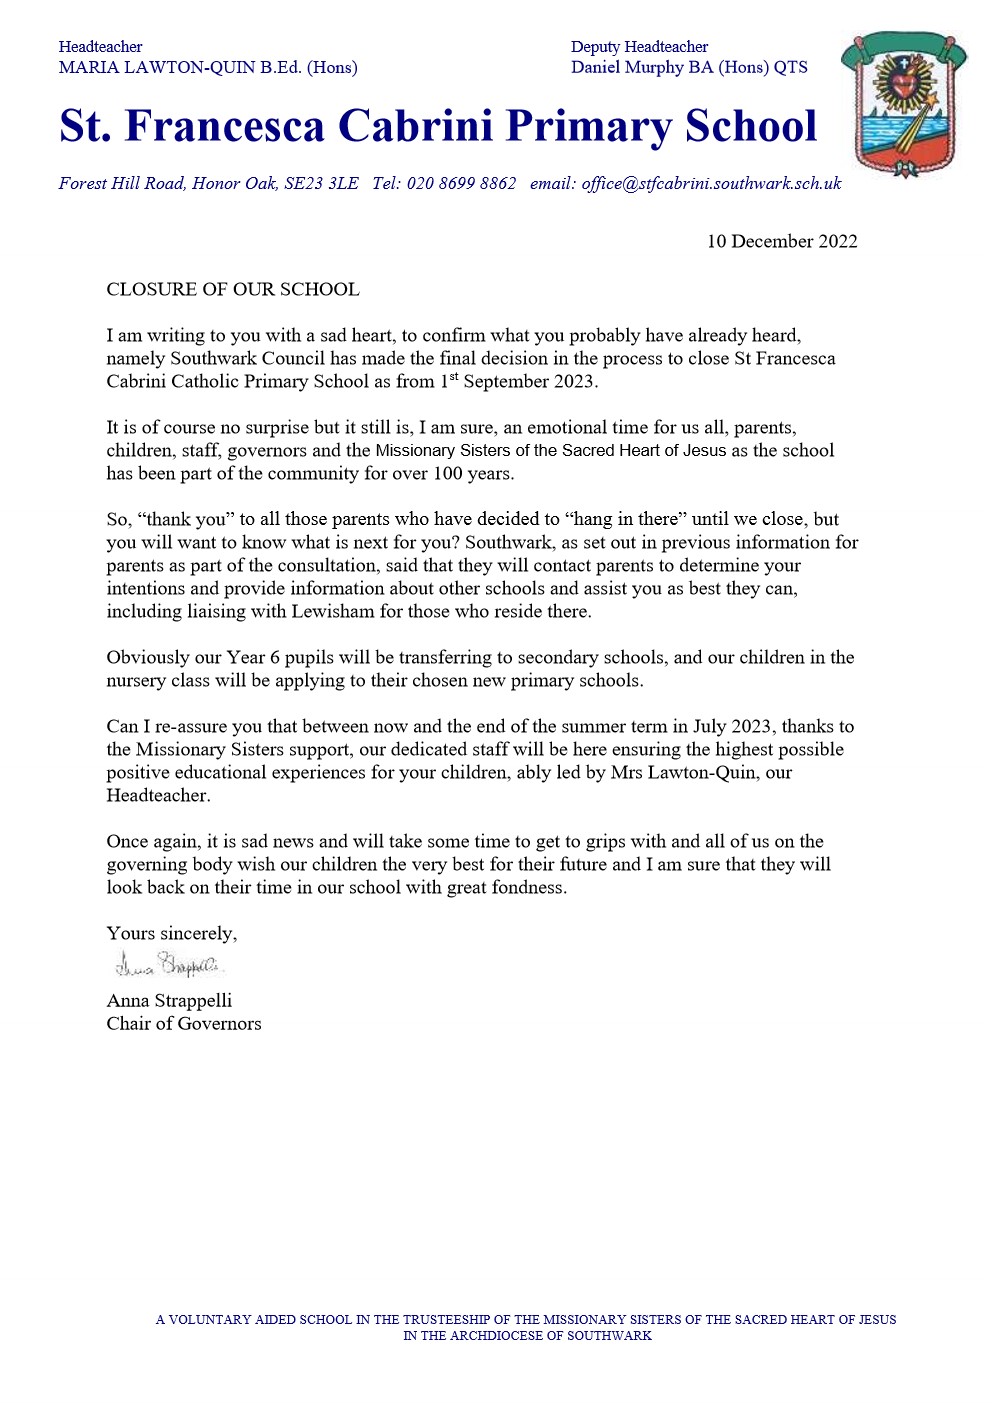 Chairs Letter to Parents